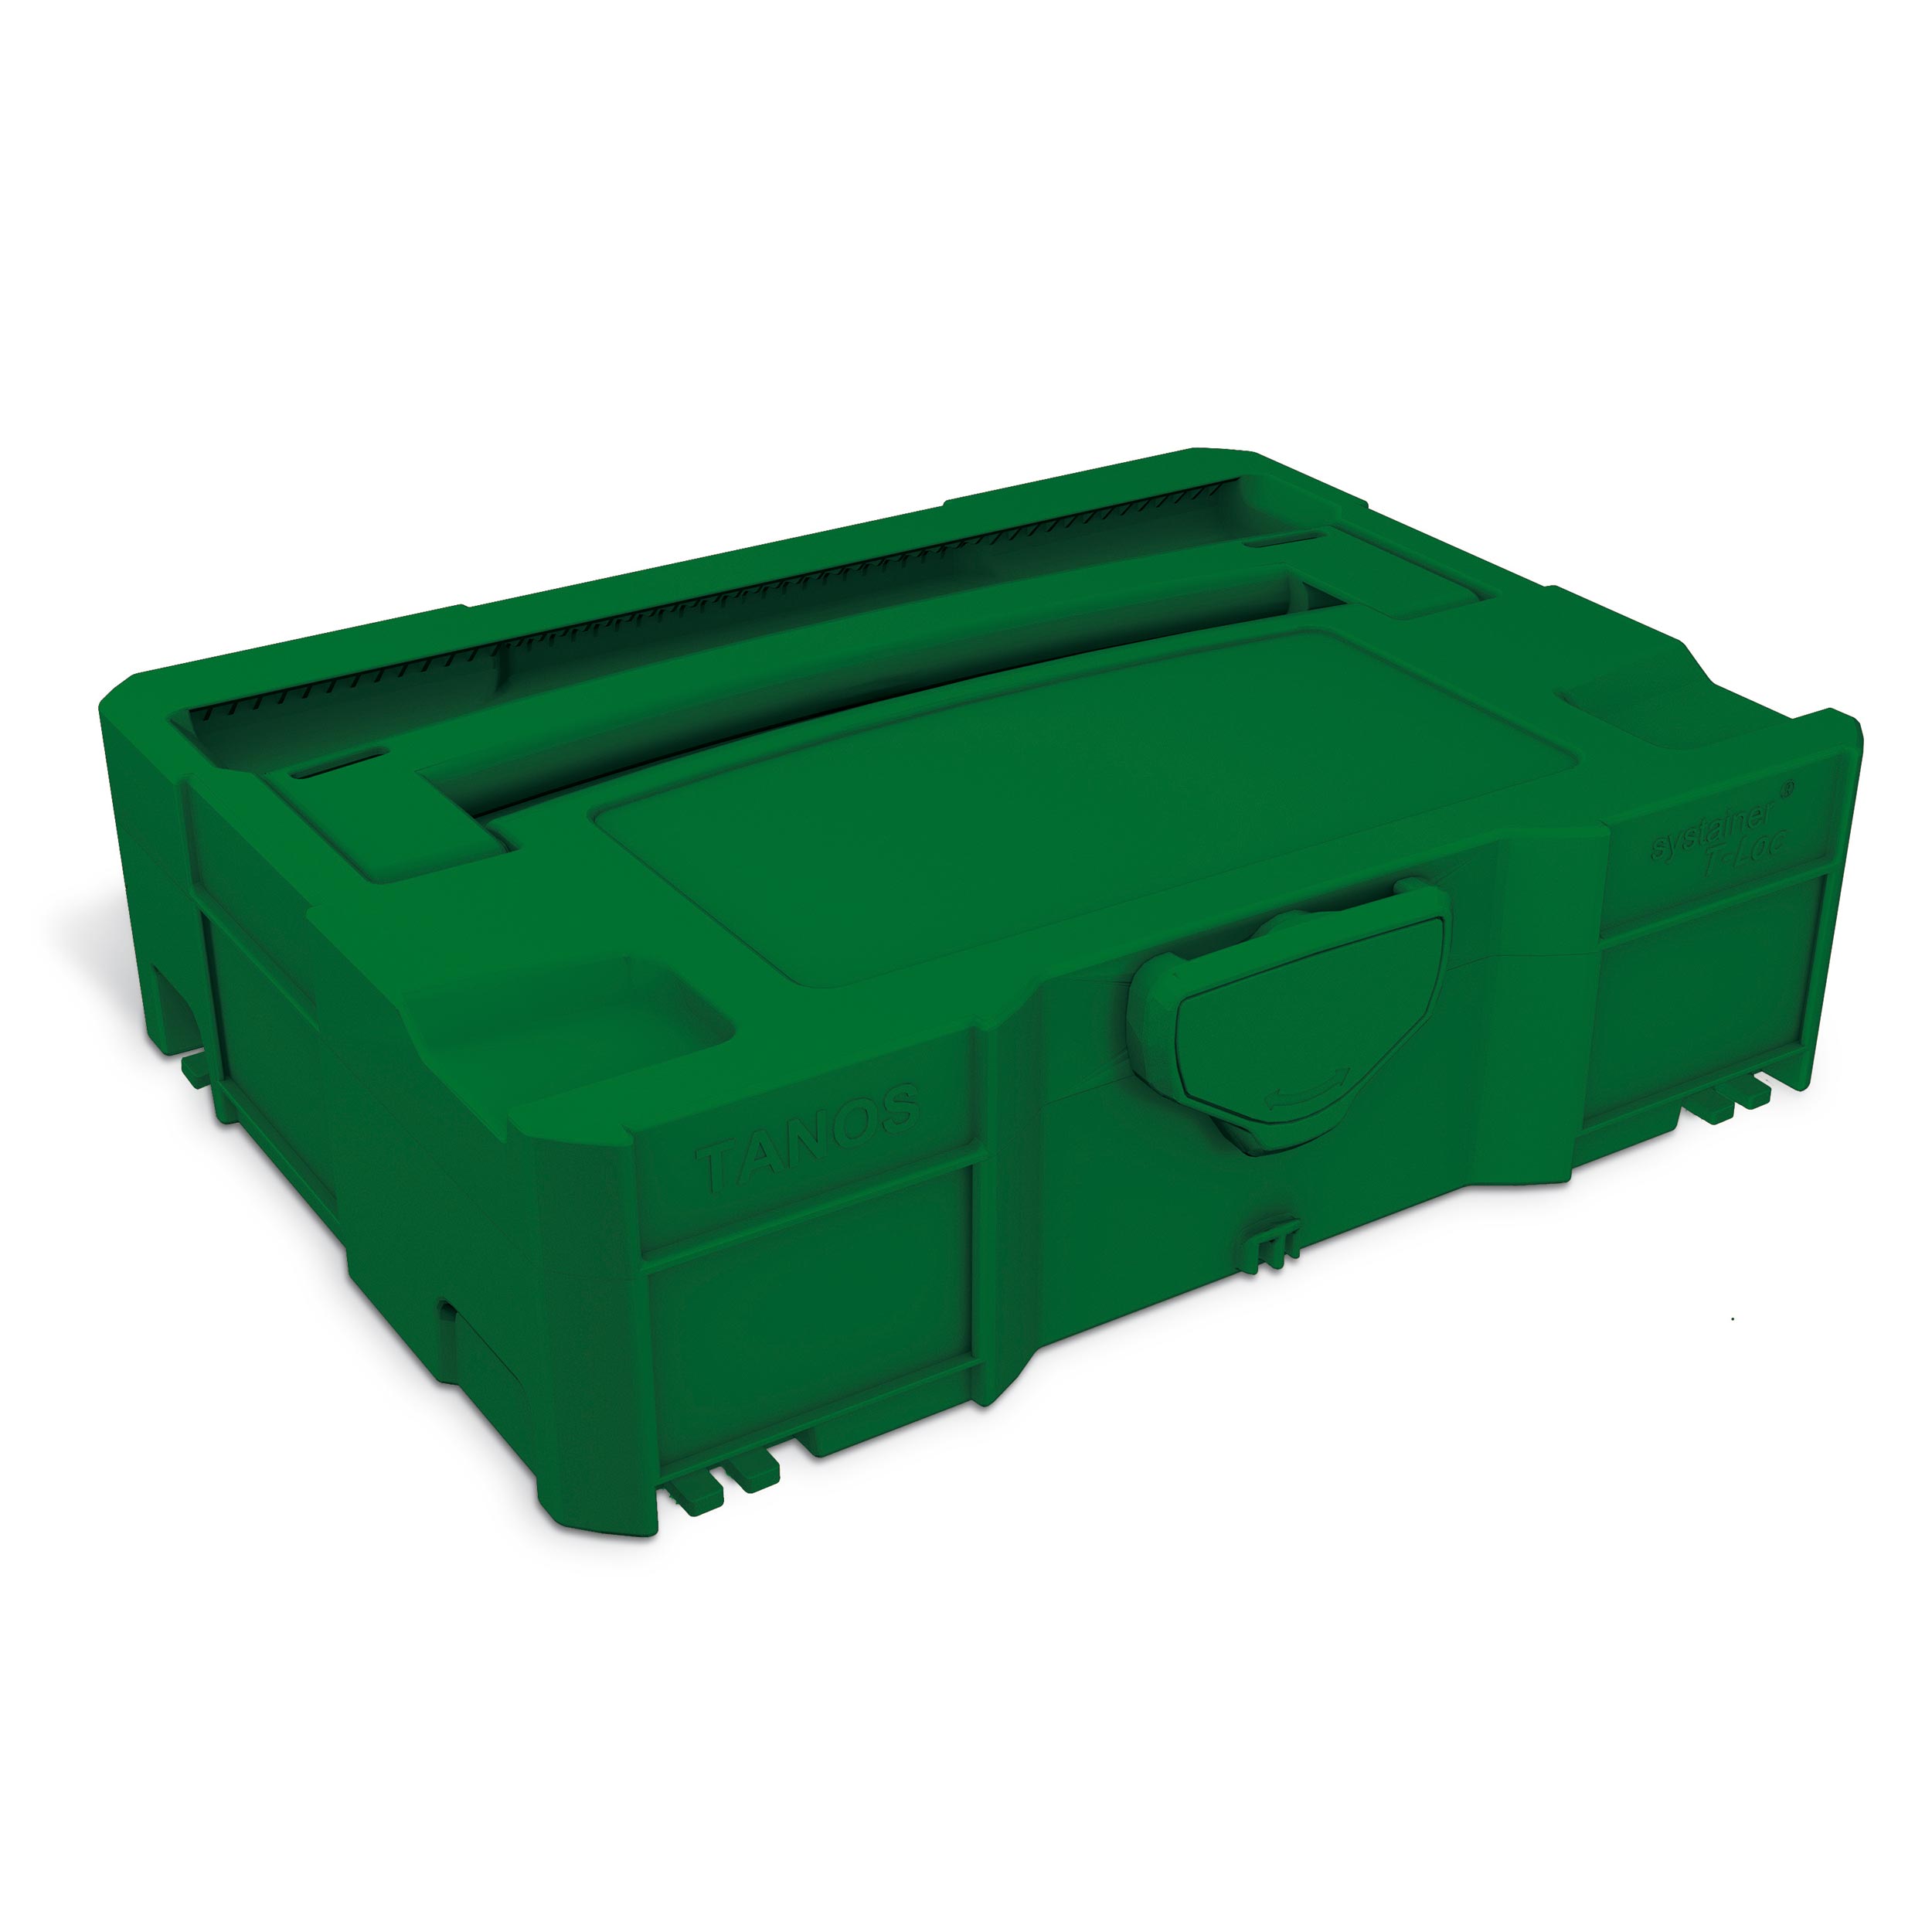 Systainer T-loc I, Emerald Green